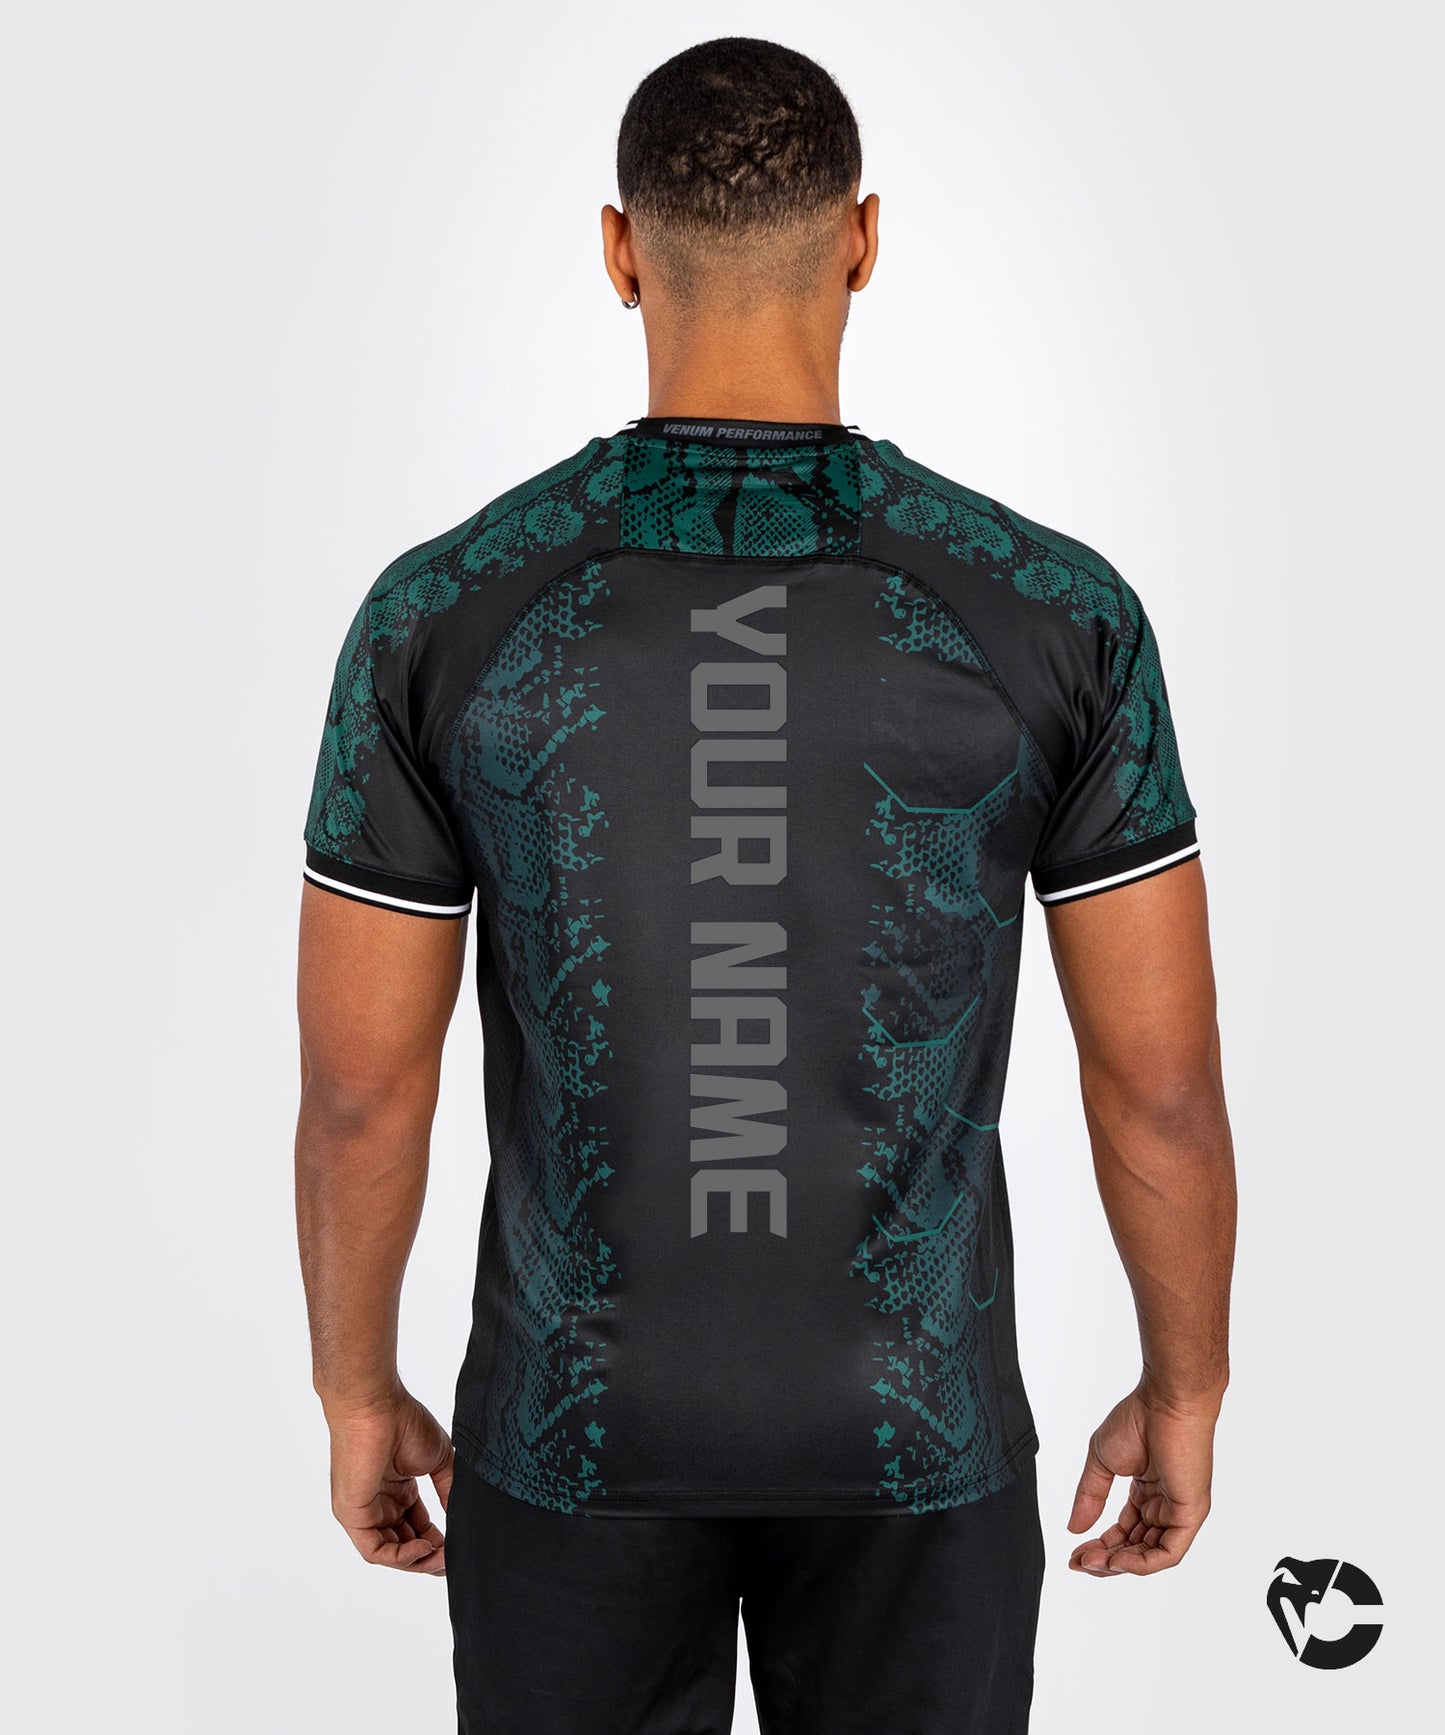 UFC Adrenaline by Venum Personalized Authentic Fight Night Men’s Jersey - Emerald Edition - Green/Black